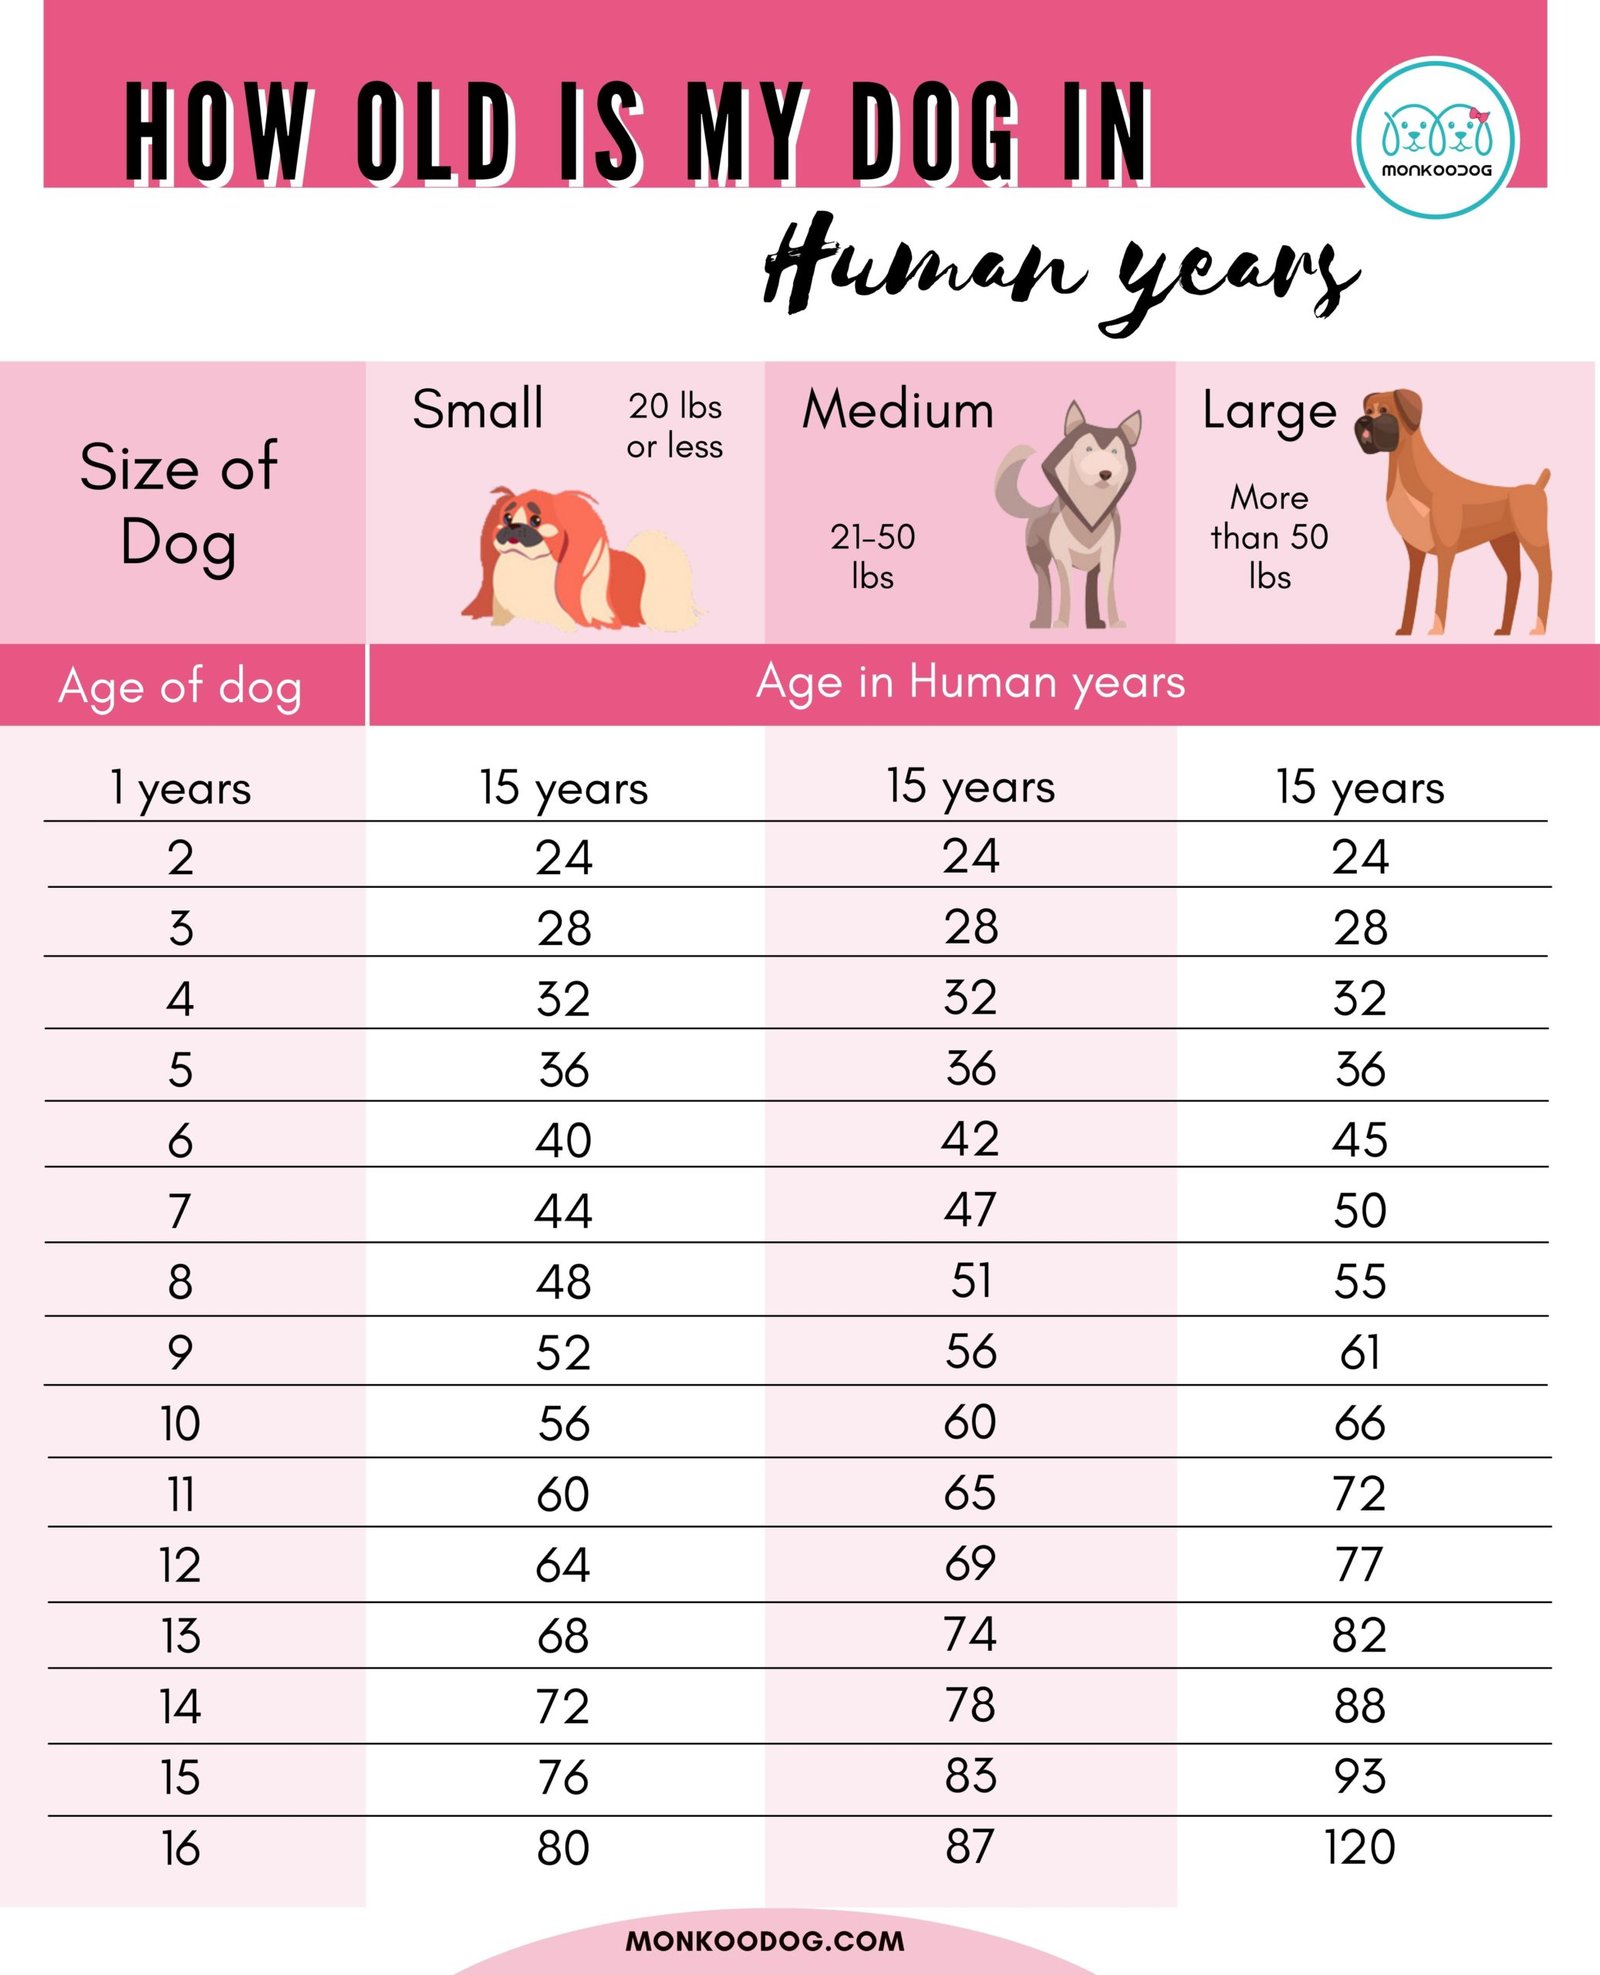 How Old Is My Dog in Human Years? What's My Dog's Human Age?